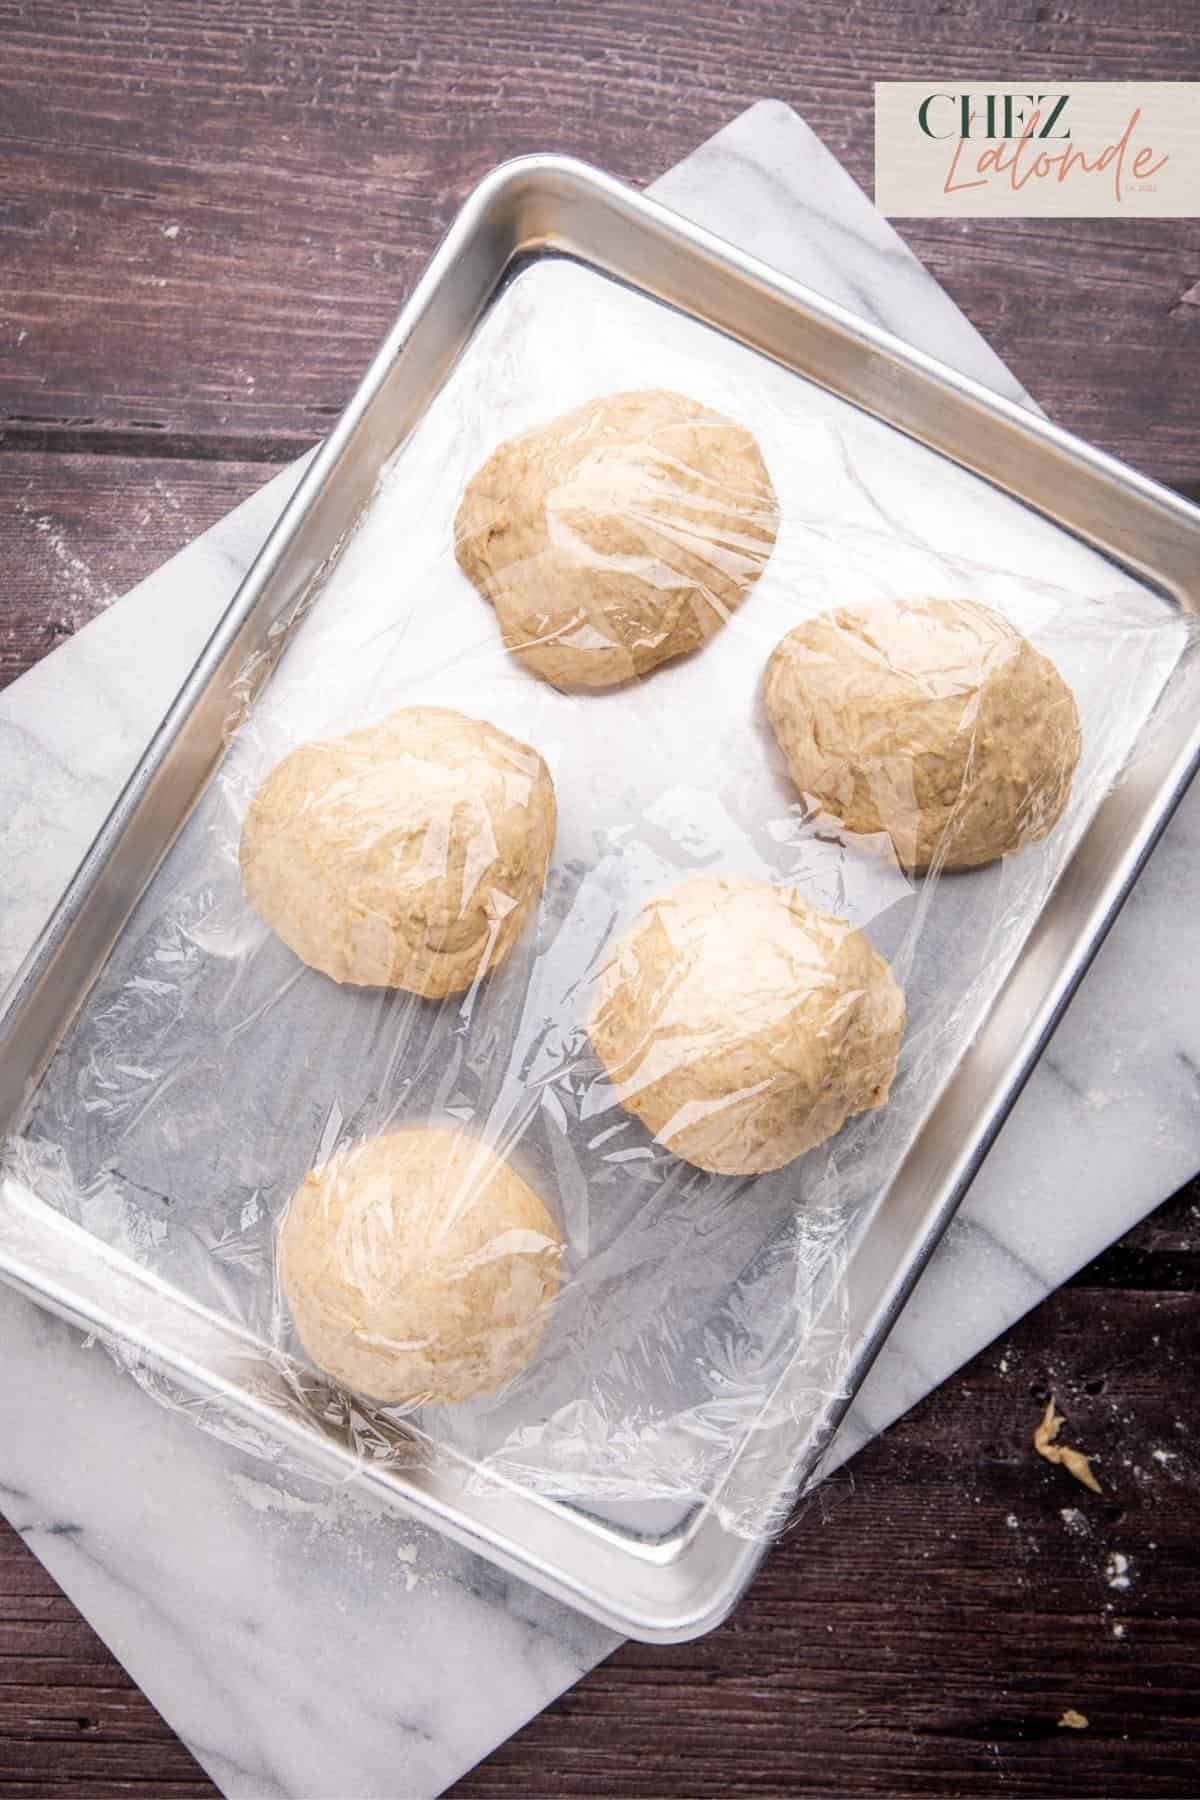 Place the dough balls on a baking sheet, cover them with plastic wrap, and return the tray to a warm spot for another 15 to 20 minutes of proofing.